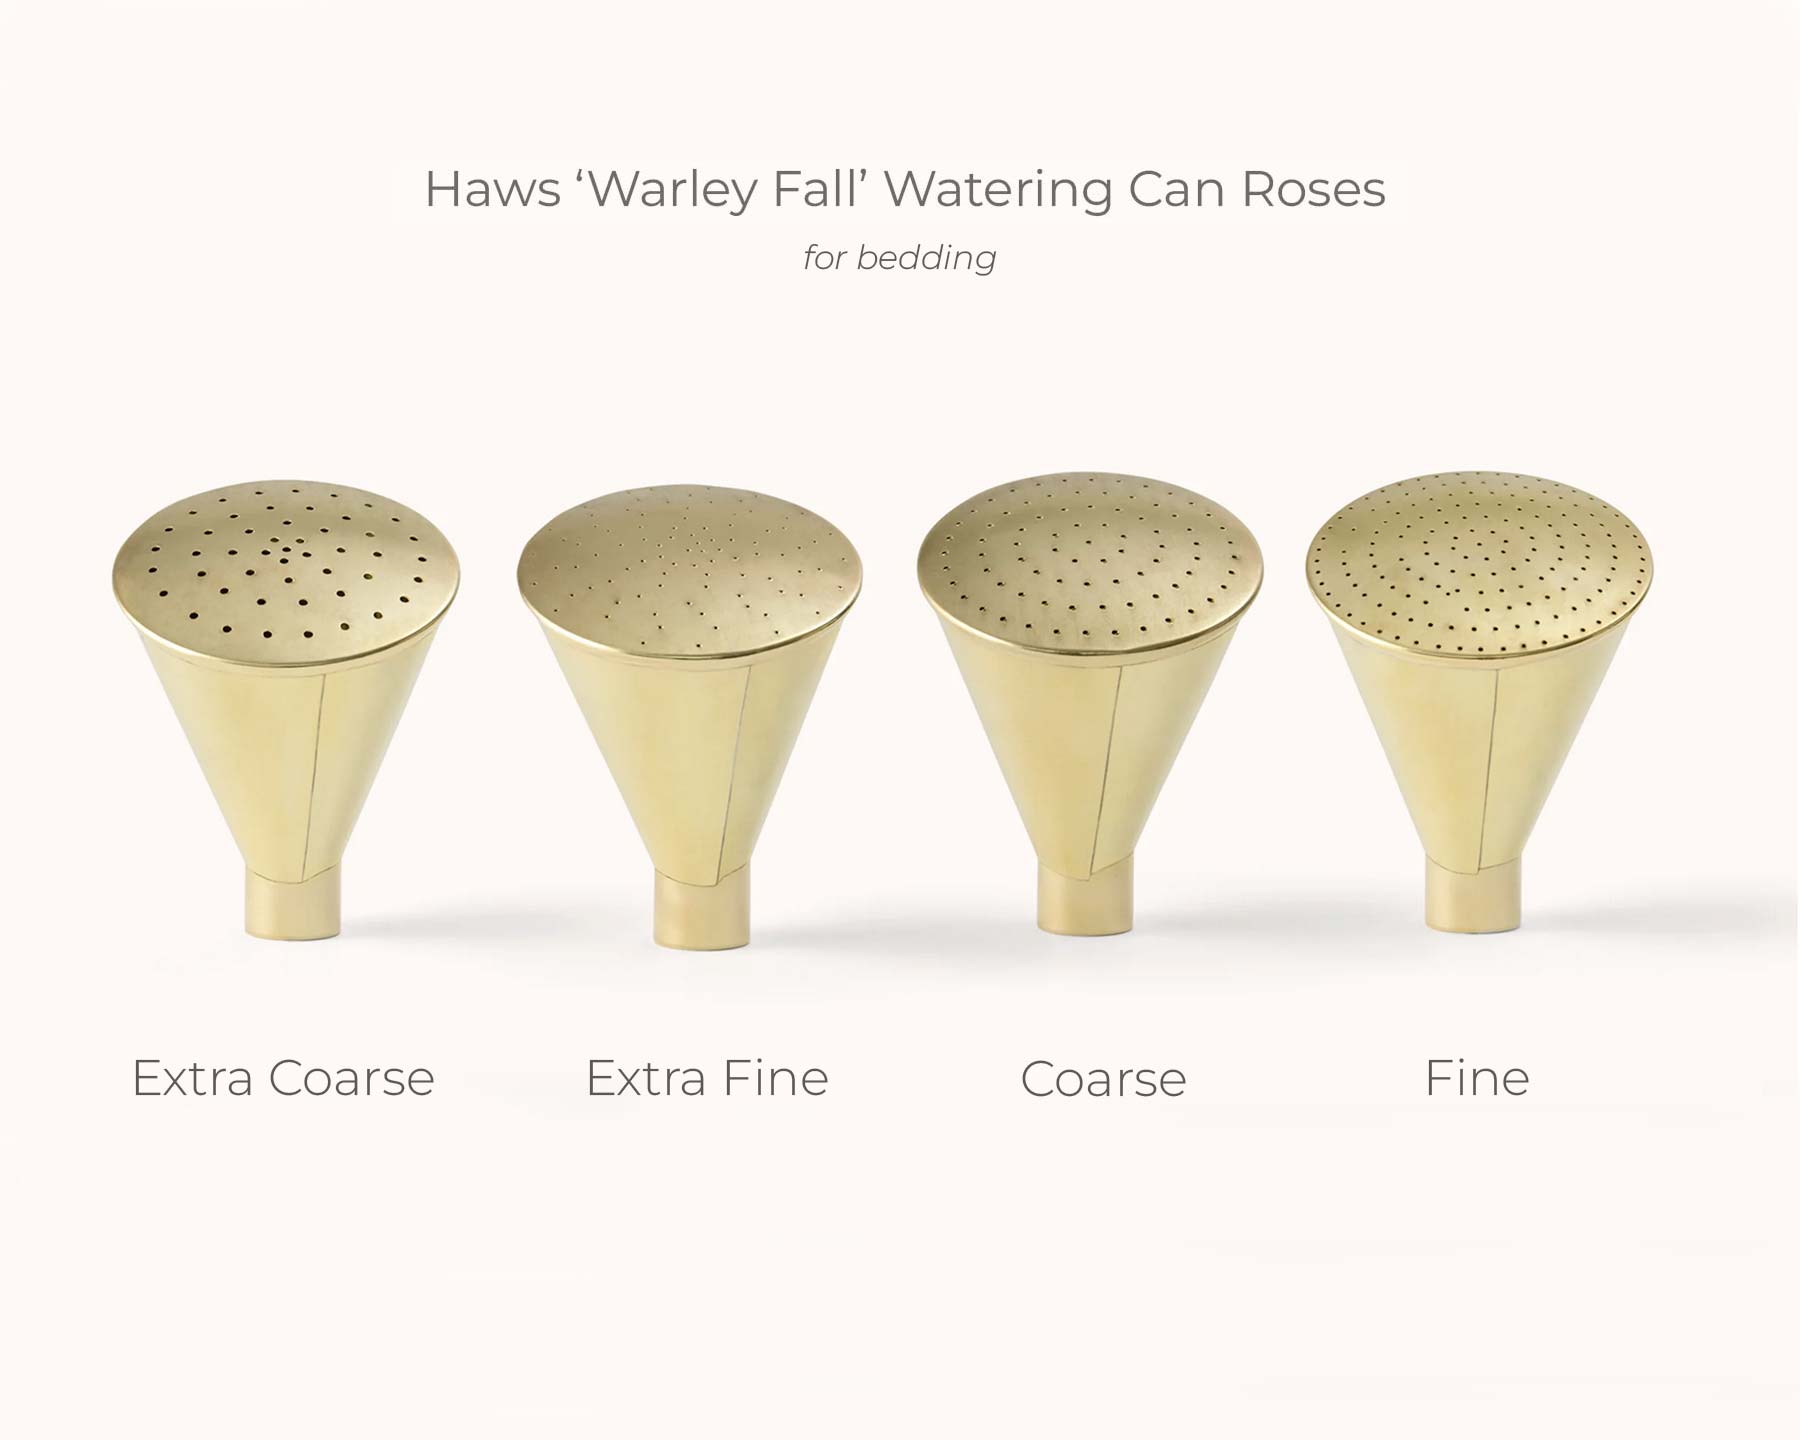 Range of Brass Round Potting Roses for Haws Warley Fall watering cans